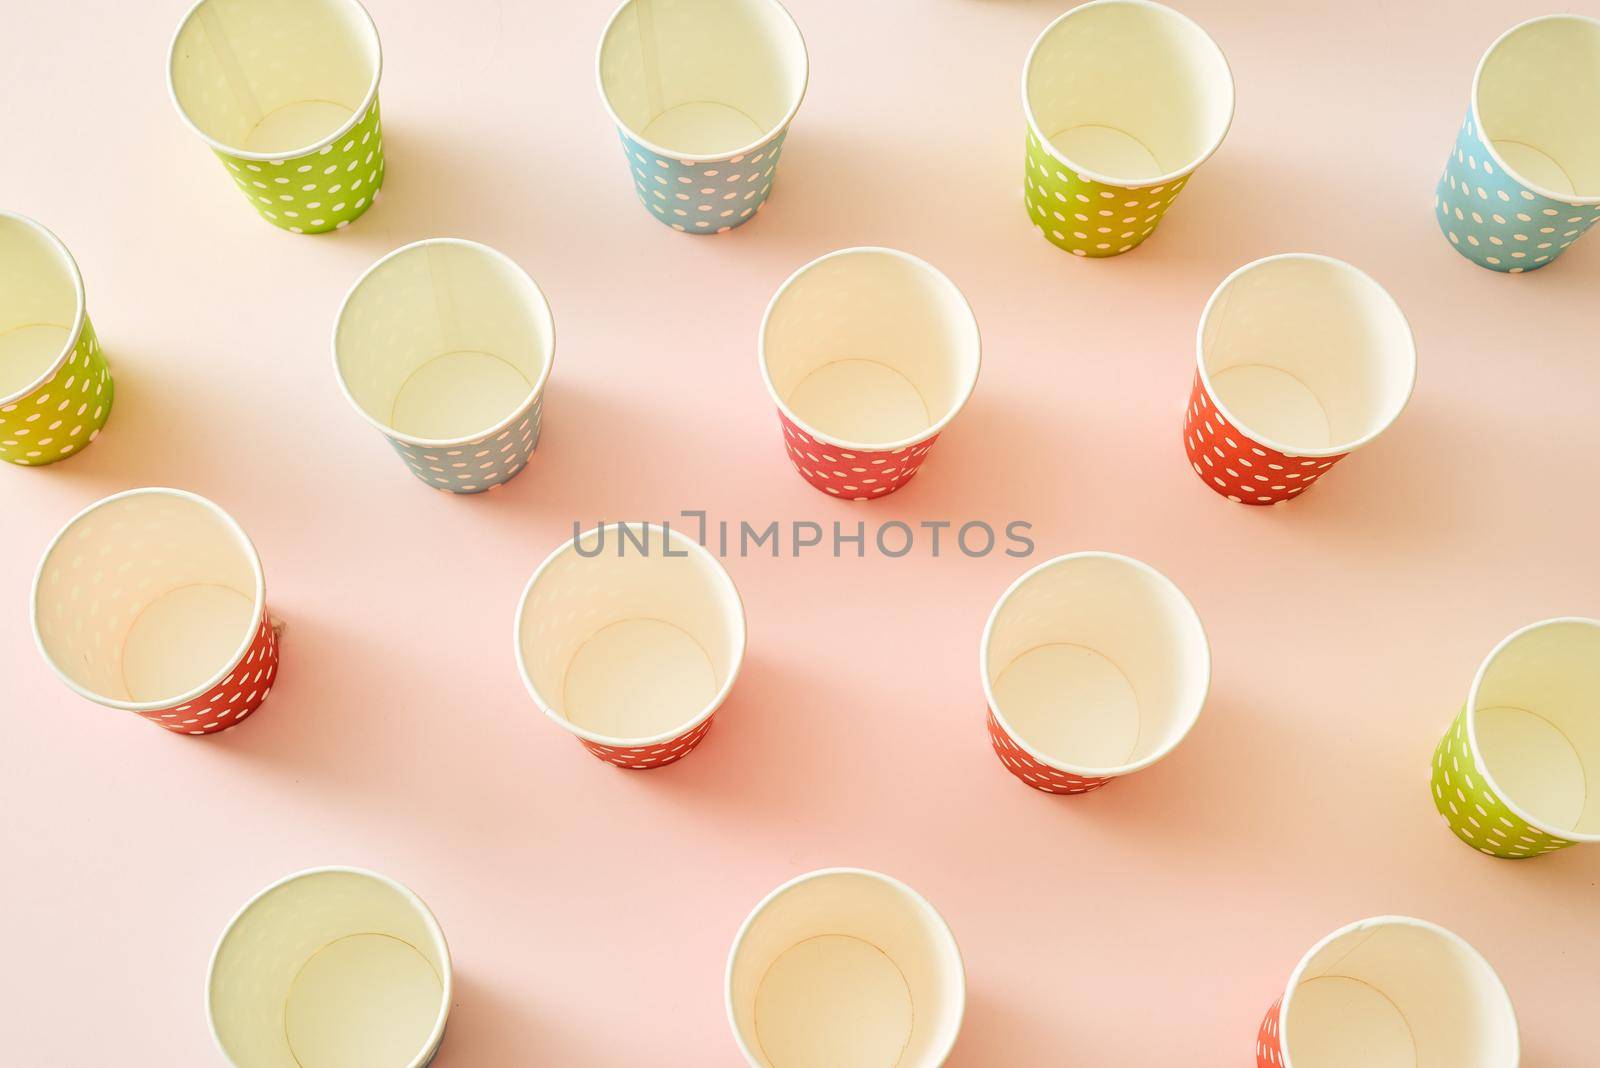 paper fashion cups on a delicate pink background by makidotvn